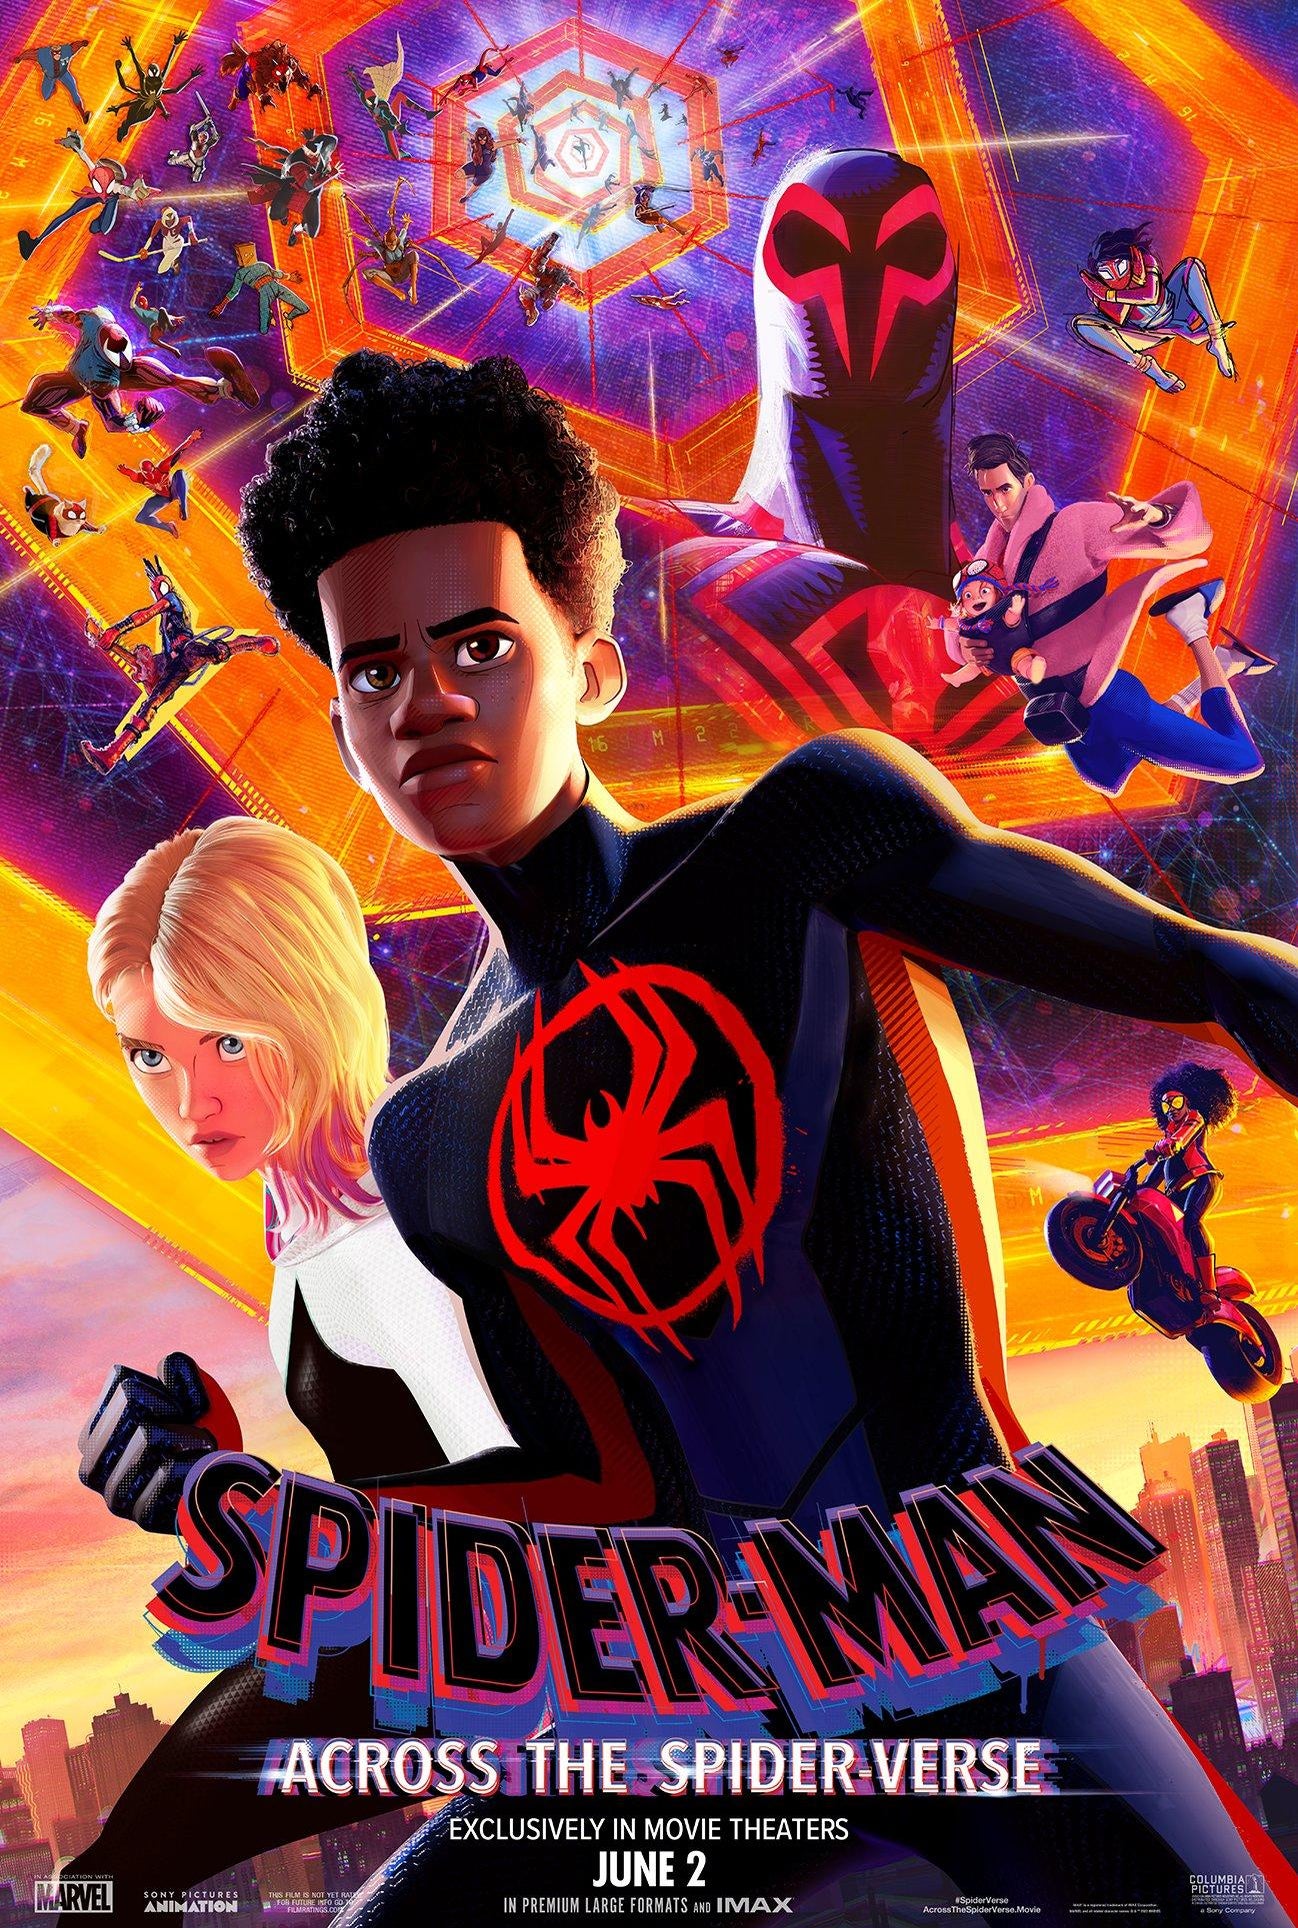 Spider-Man: Across the Spider-Verse Poster Teases a Spider-War